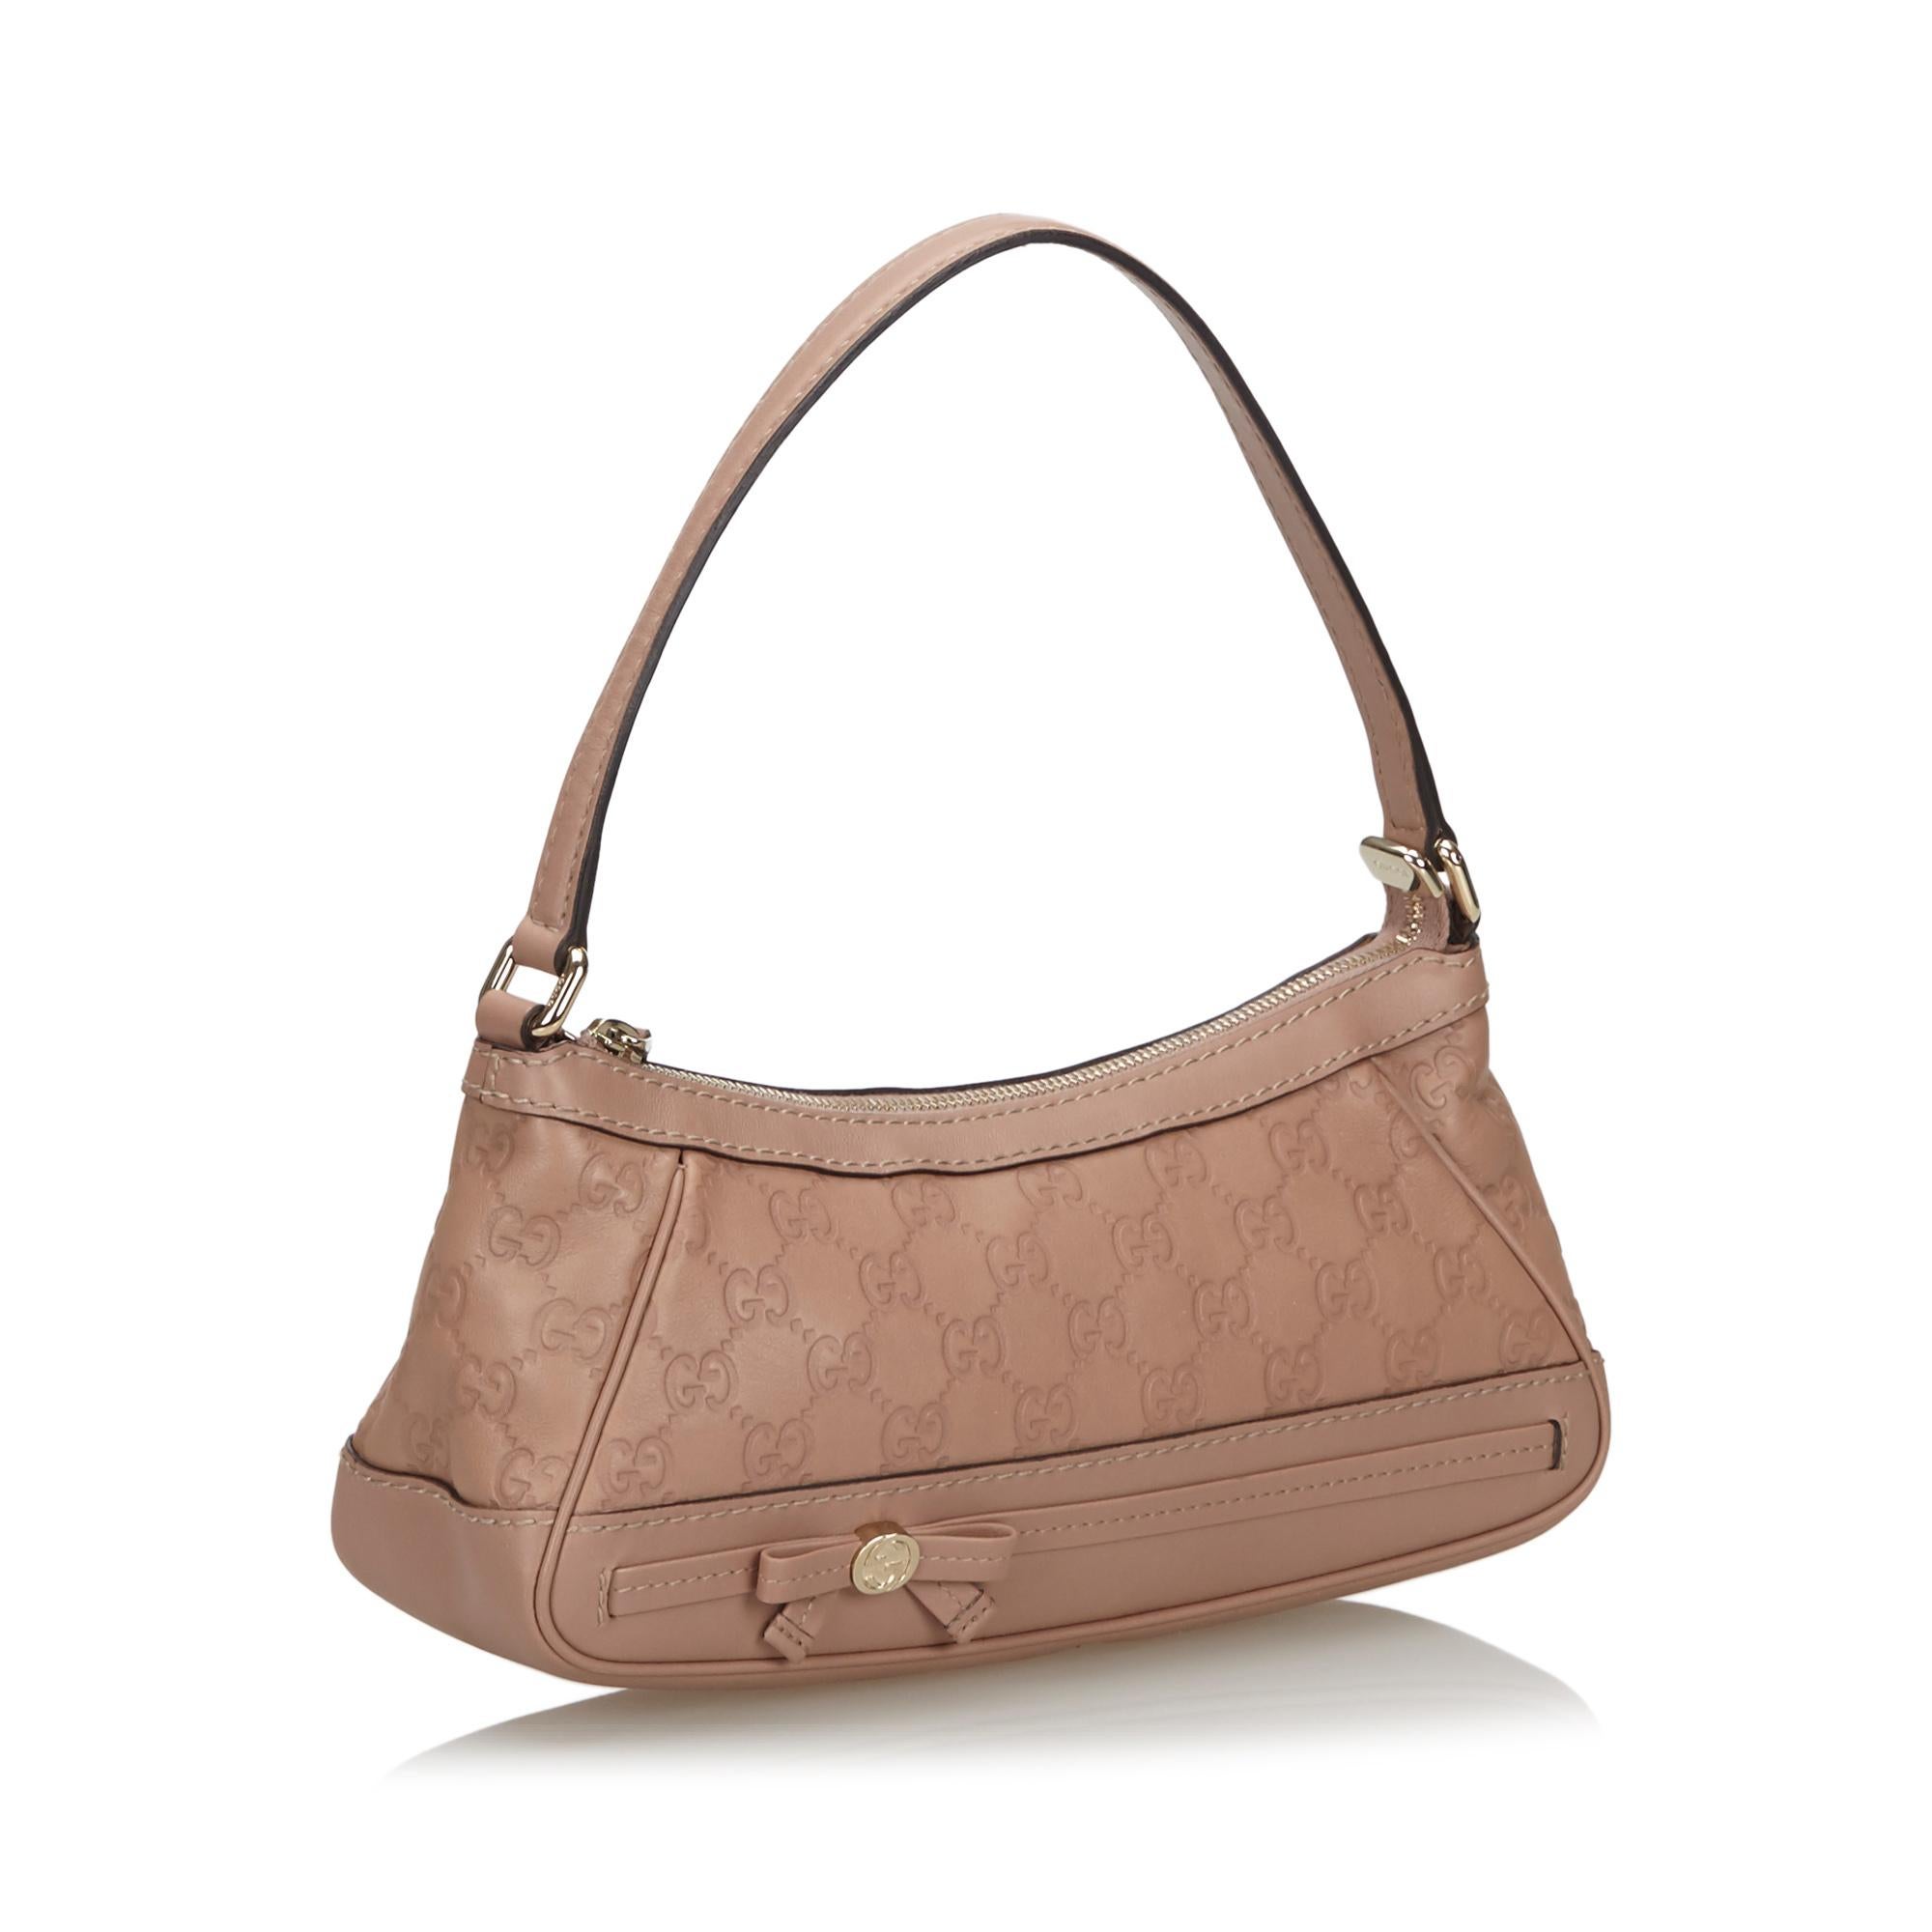 This Mayfair Pochette features a leather body, a flat leather strap, a top zip closure, and an interior slip pocket. It carries as AB condition rating.

Inclusions: 
Dust Bag

Dimensions:
Length: 13.00 cm
Width: 25.00 cm
Depth: 7.50 cm
Shoulder